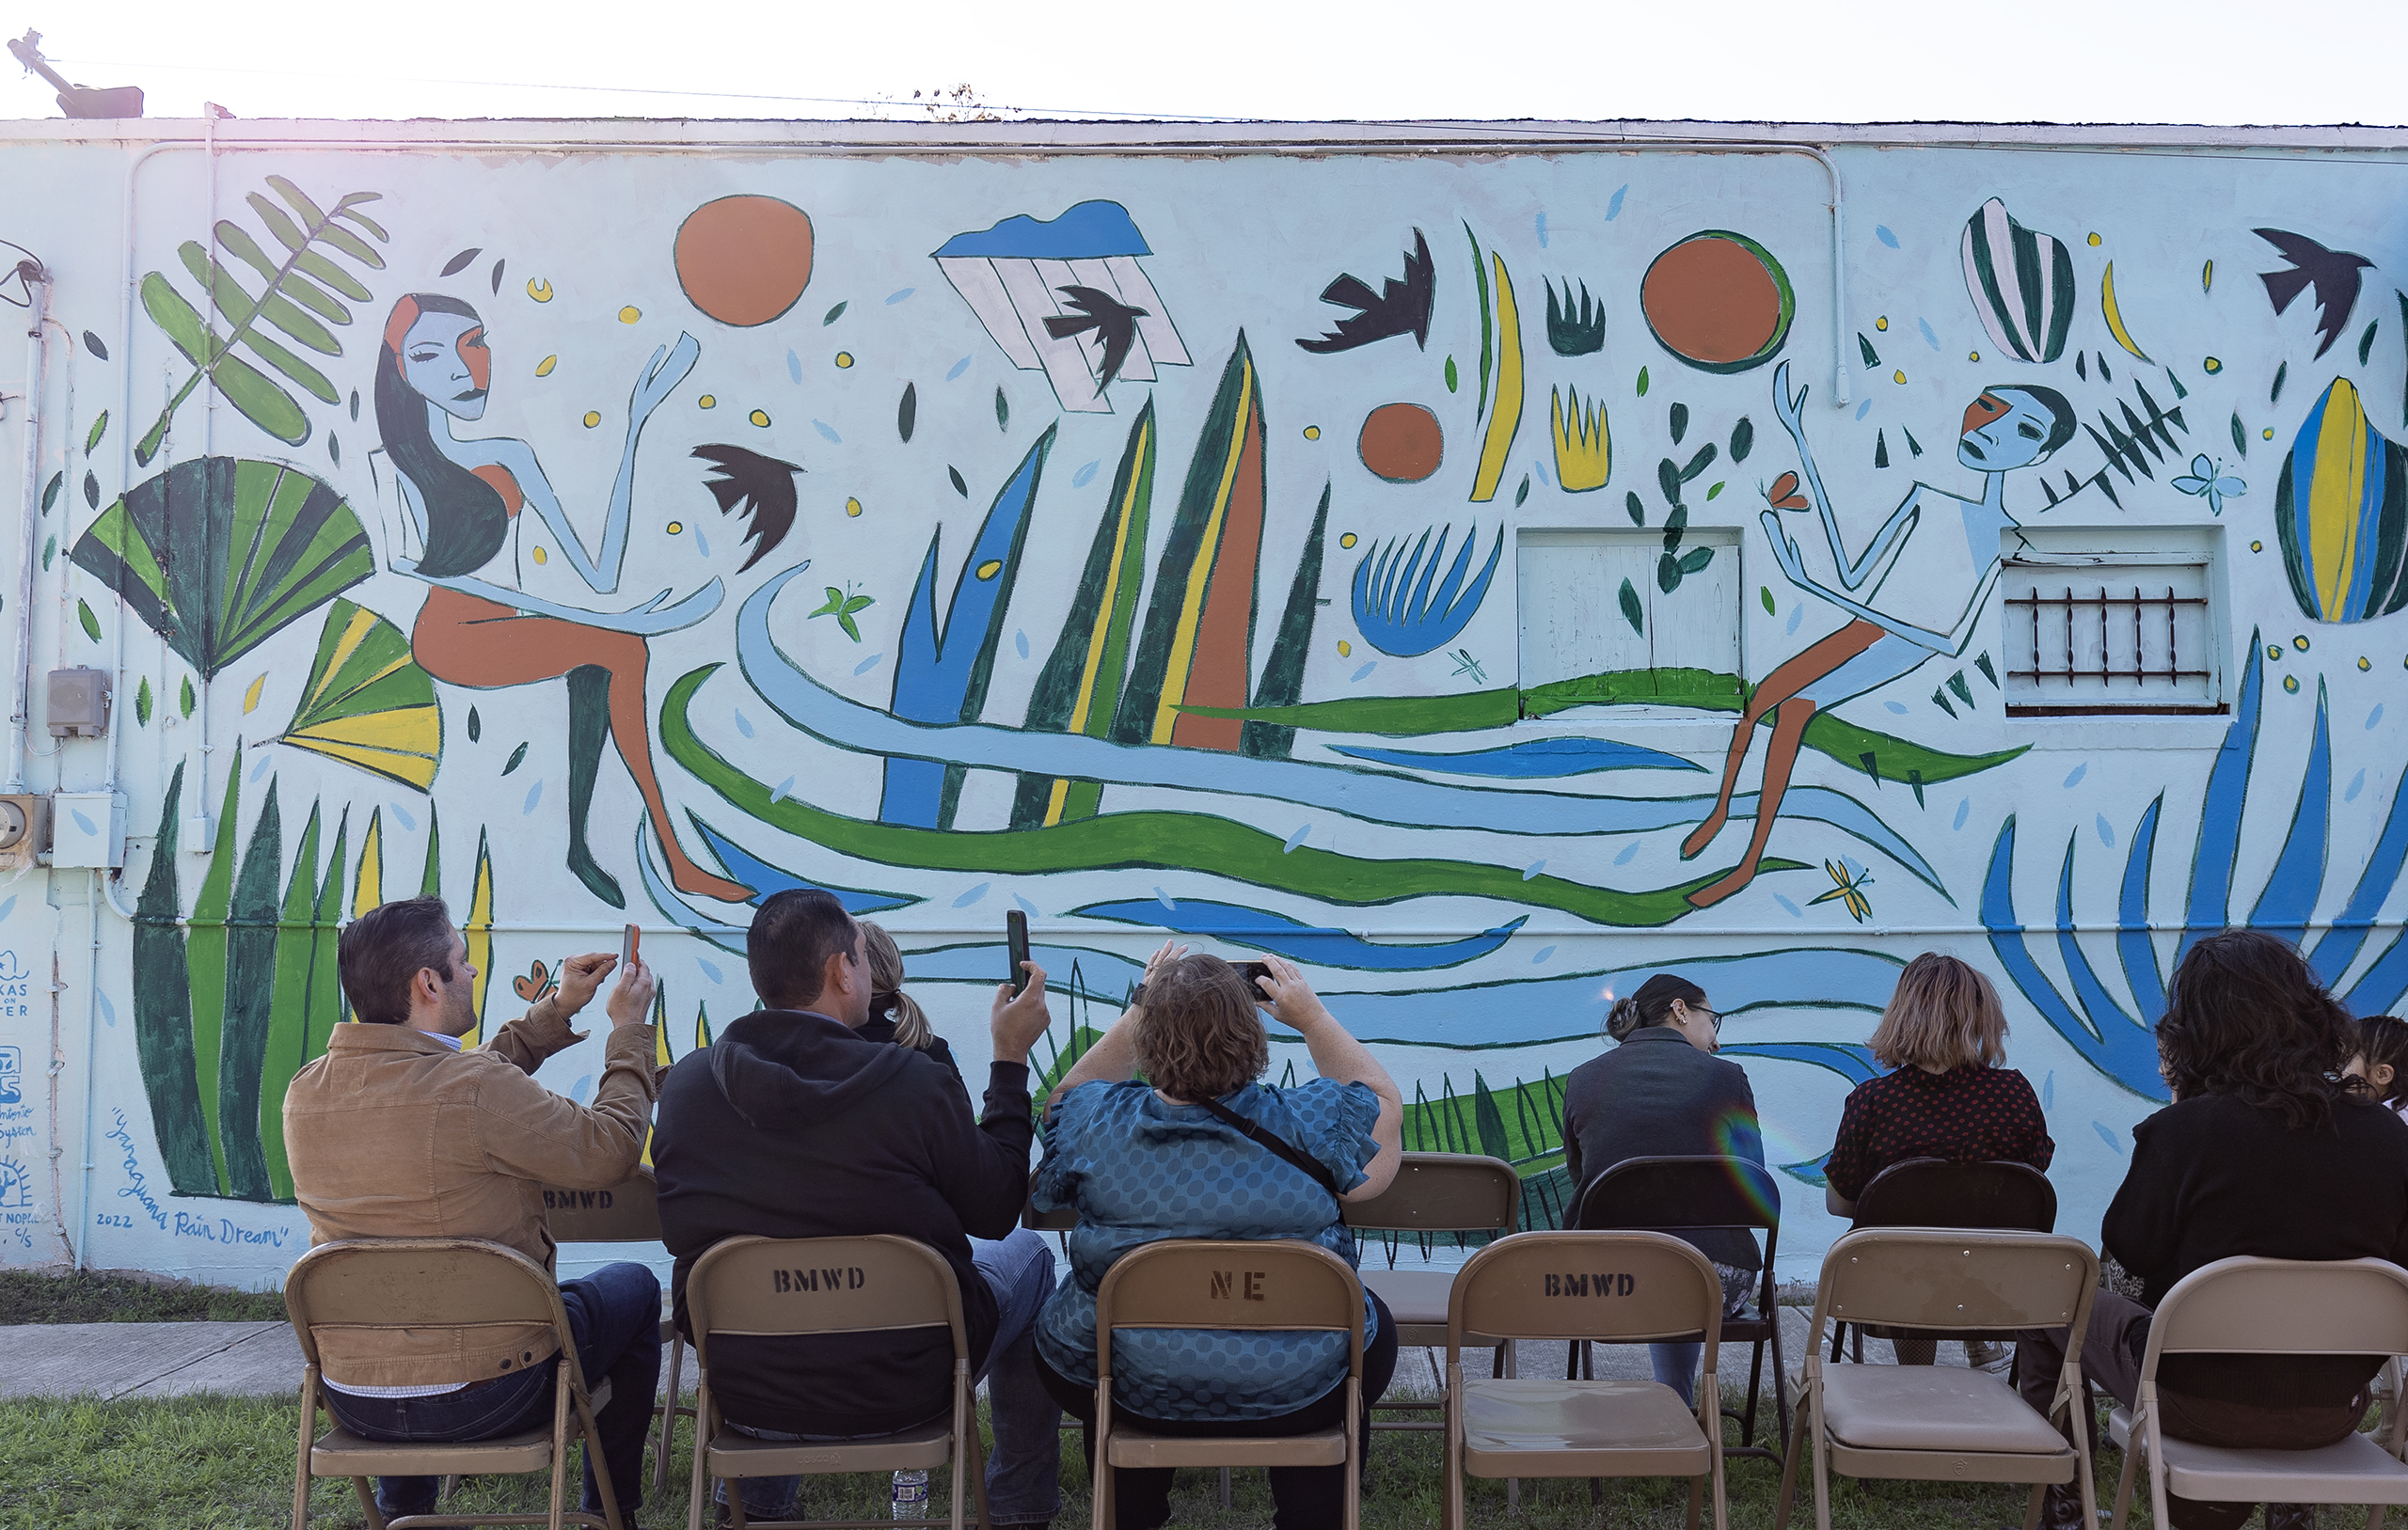 Art of Four - Artist Talk and Mural Unveiling - San Pedro Creek